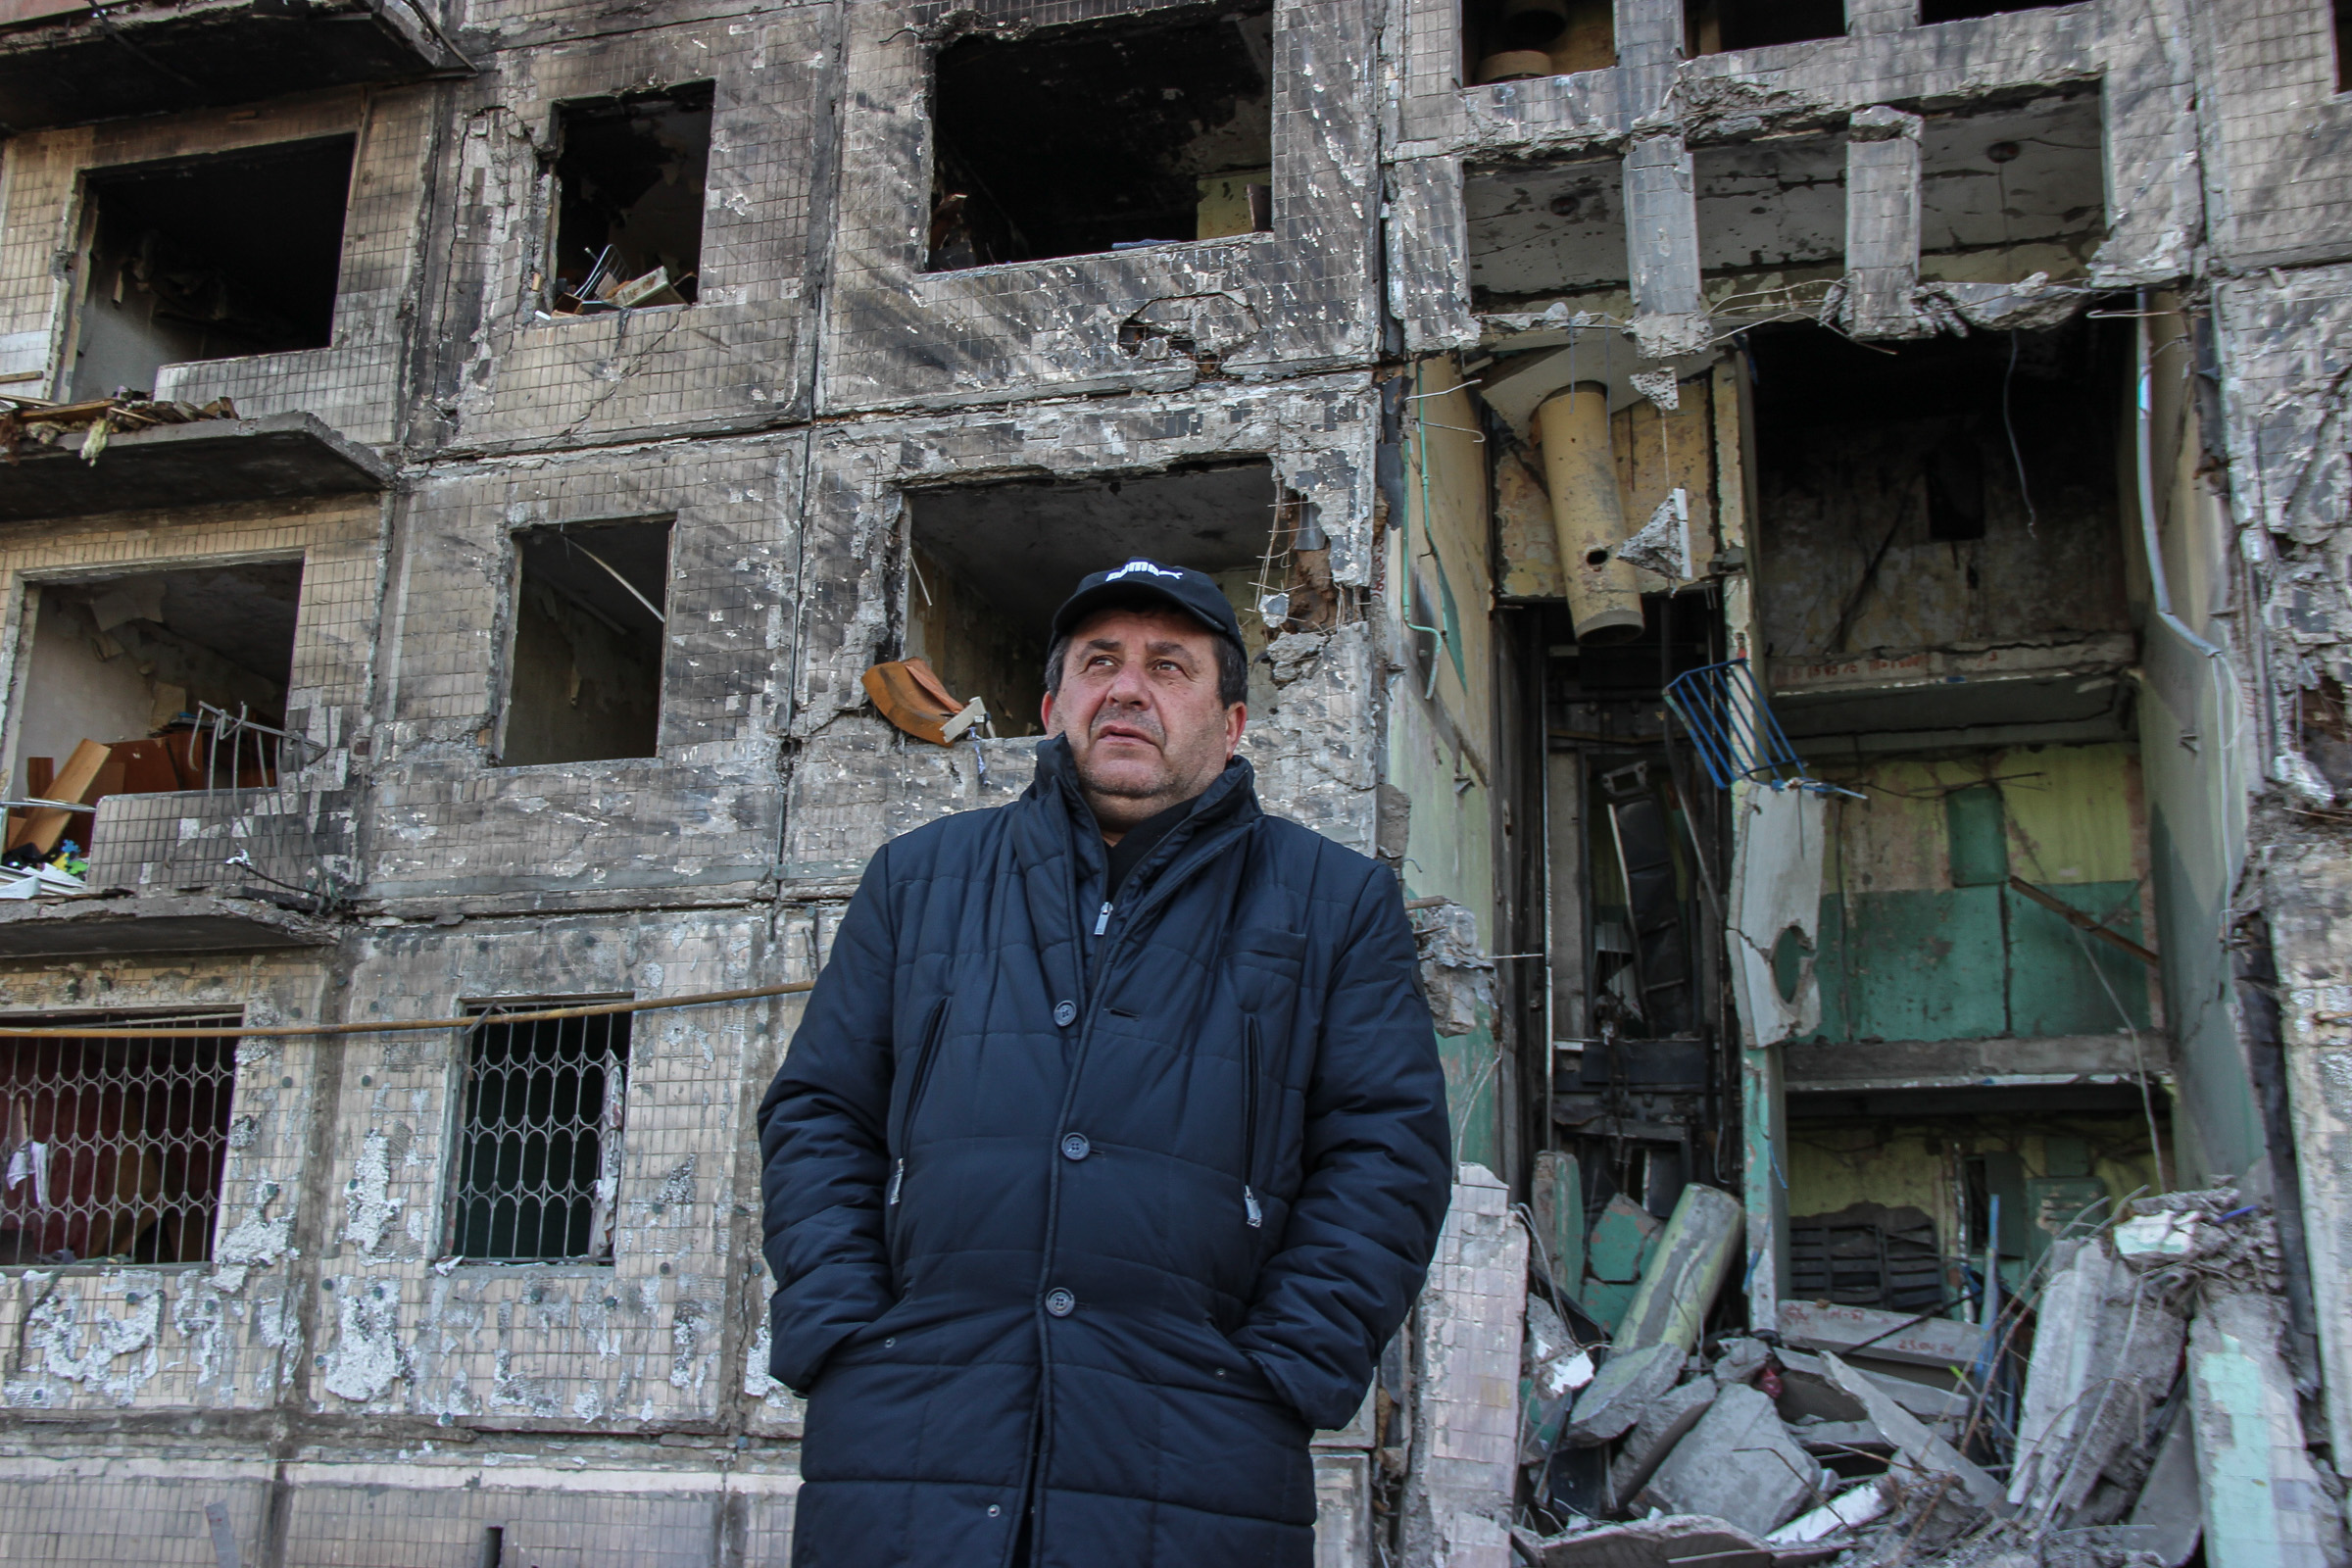 Residents of building hit by Russian missile come to ruins of their homes